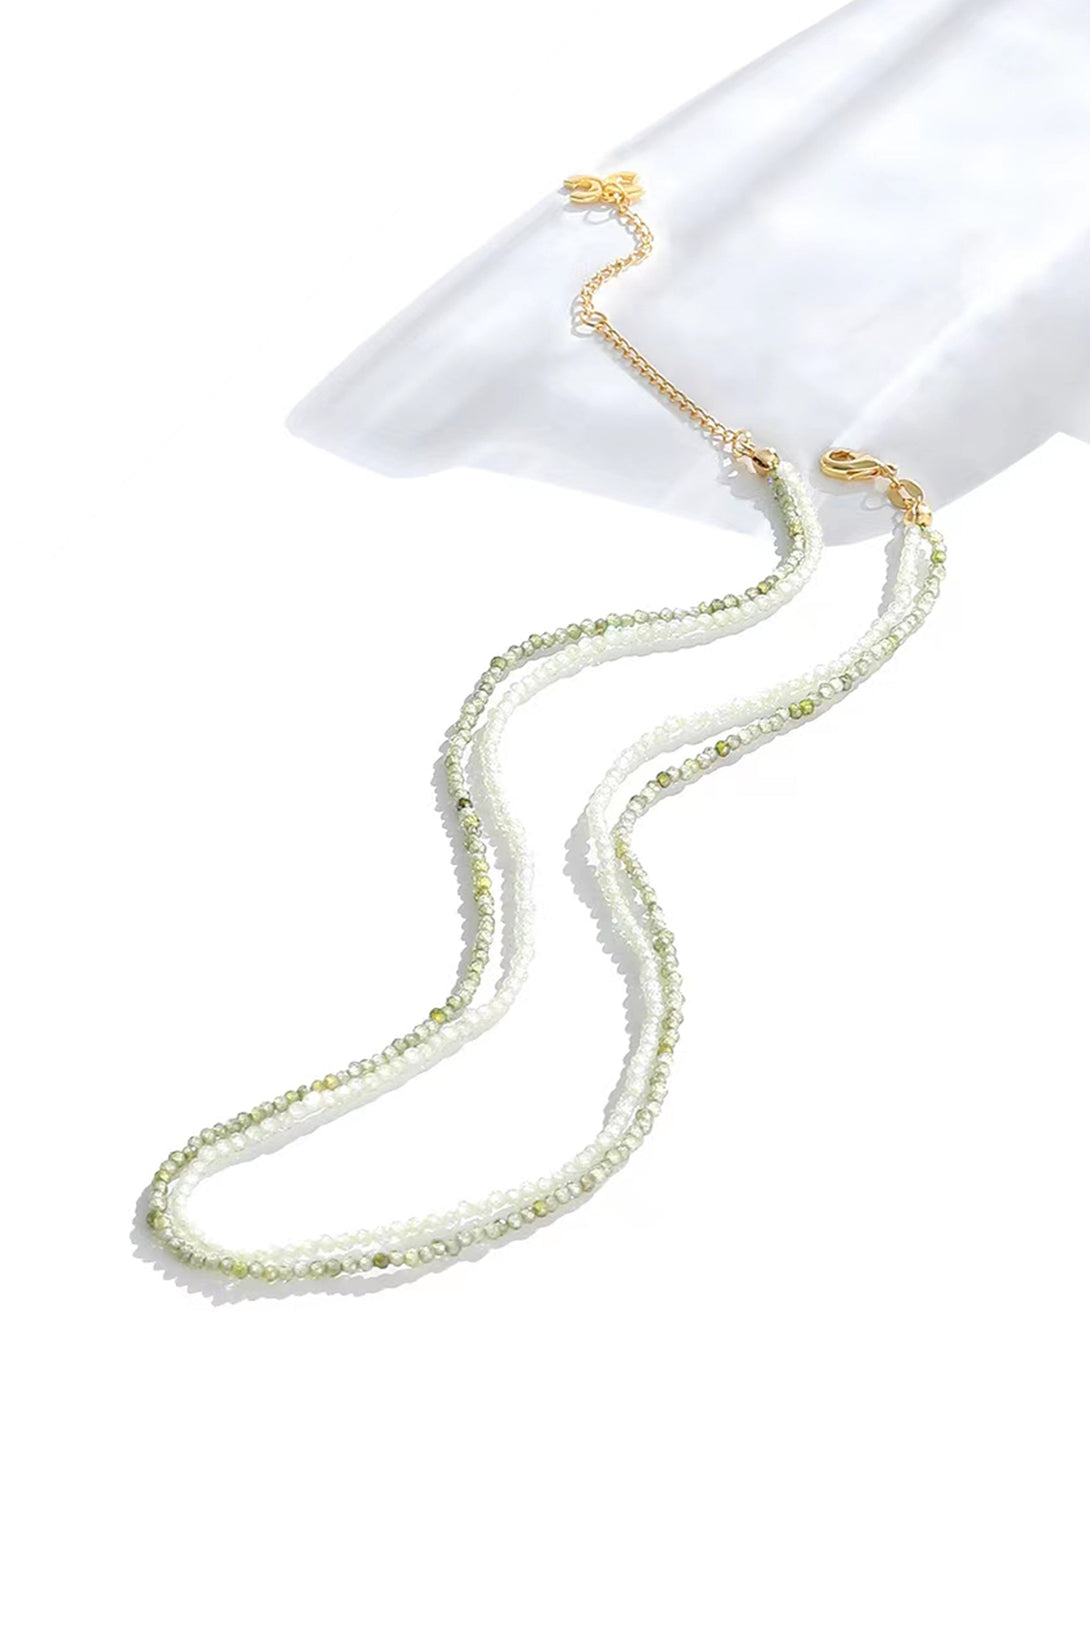 Clarice Lime Green Crystal Mini Beaded Double Layered Necklace - Classicharms